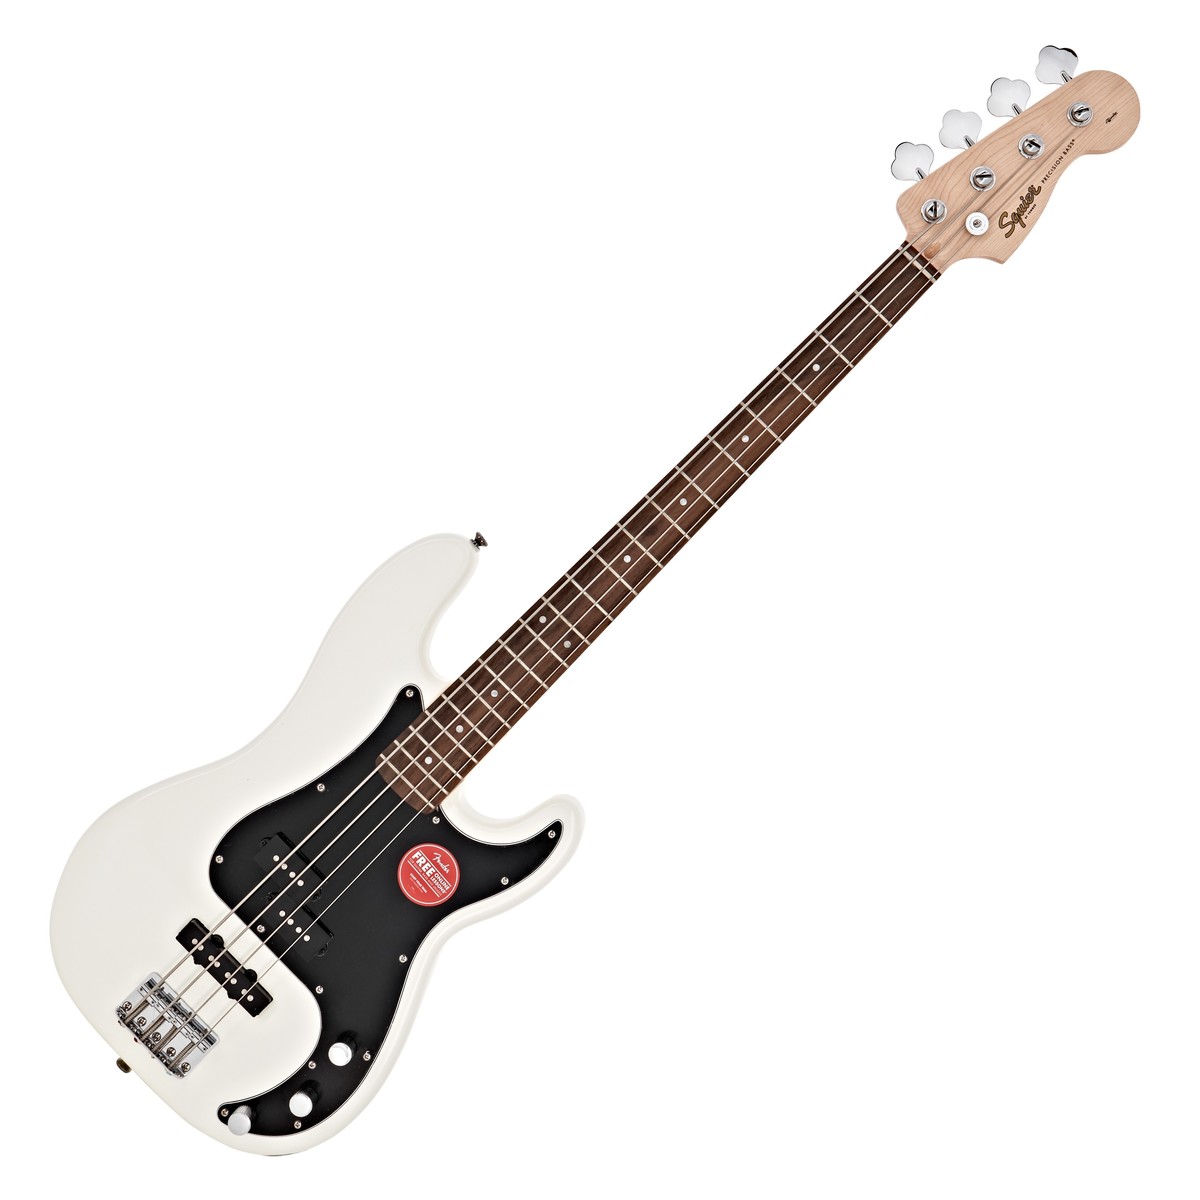 Fender Squier Affinity Bass PJ Olympic White